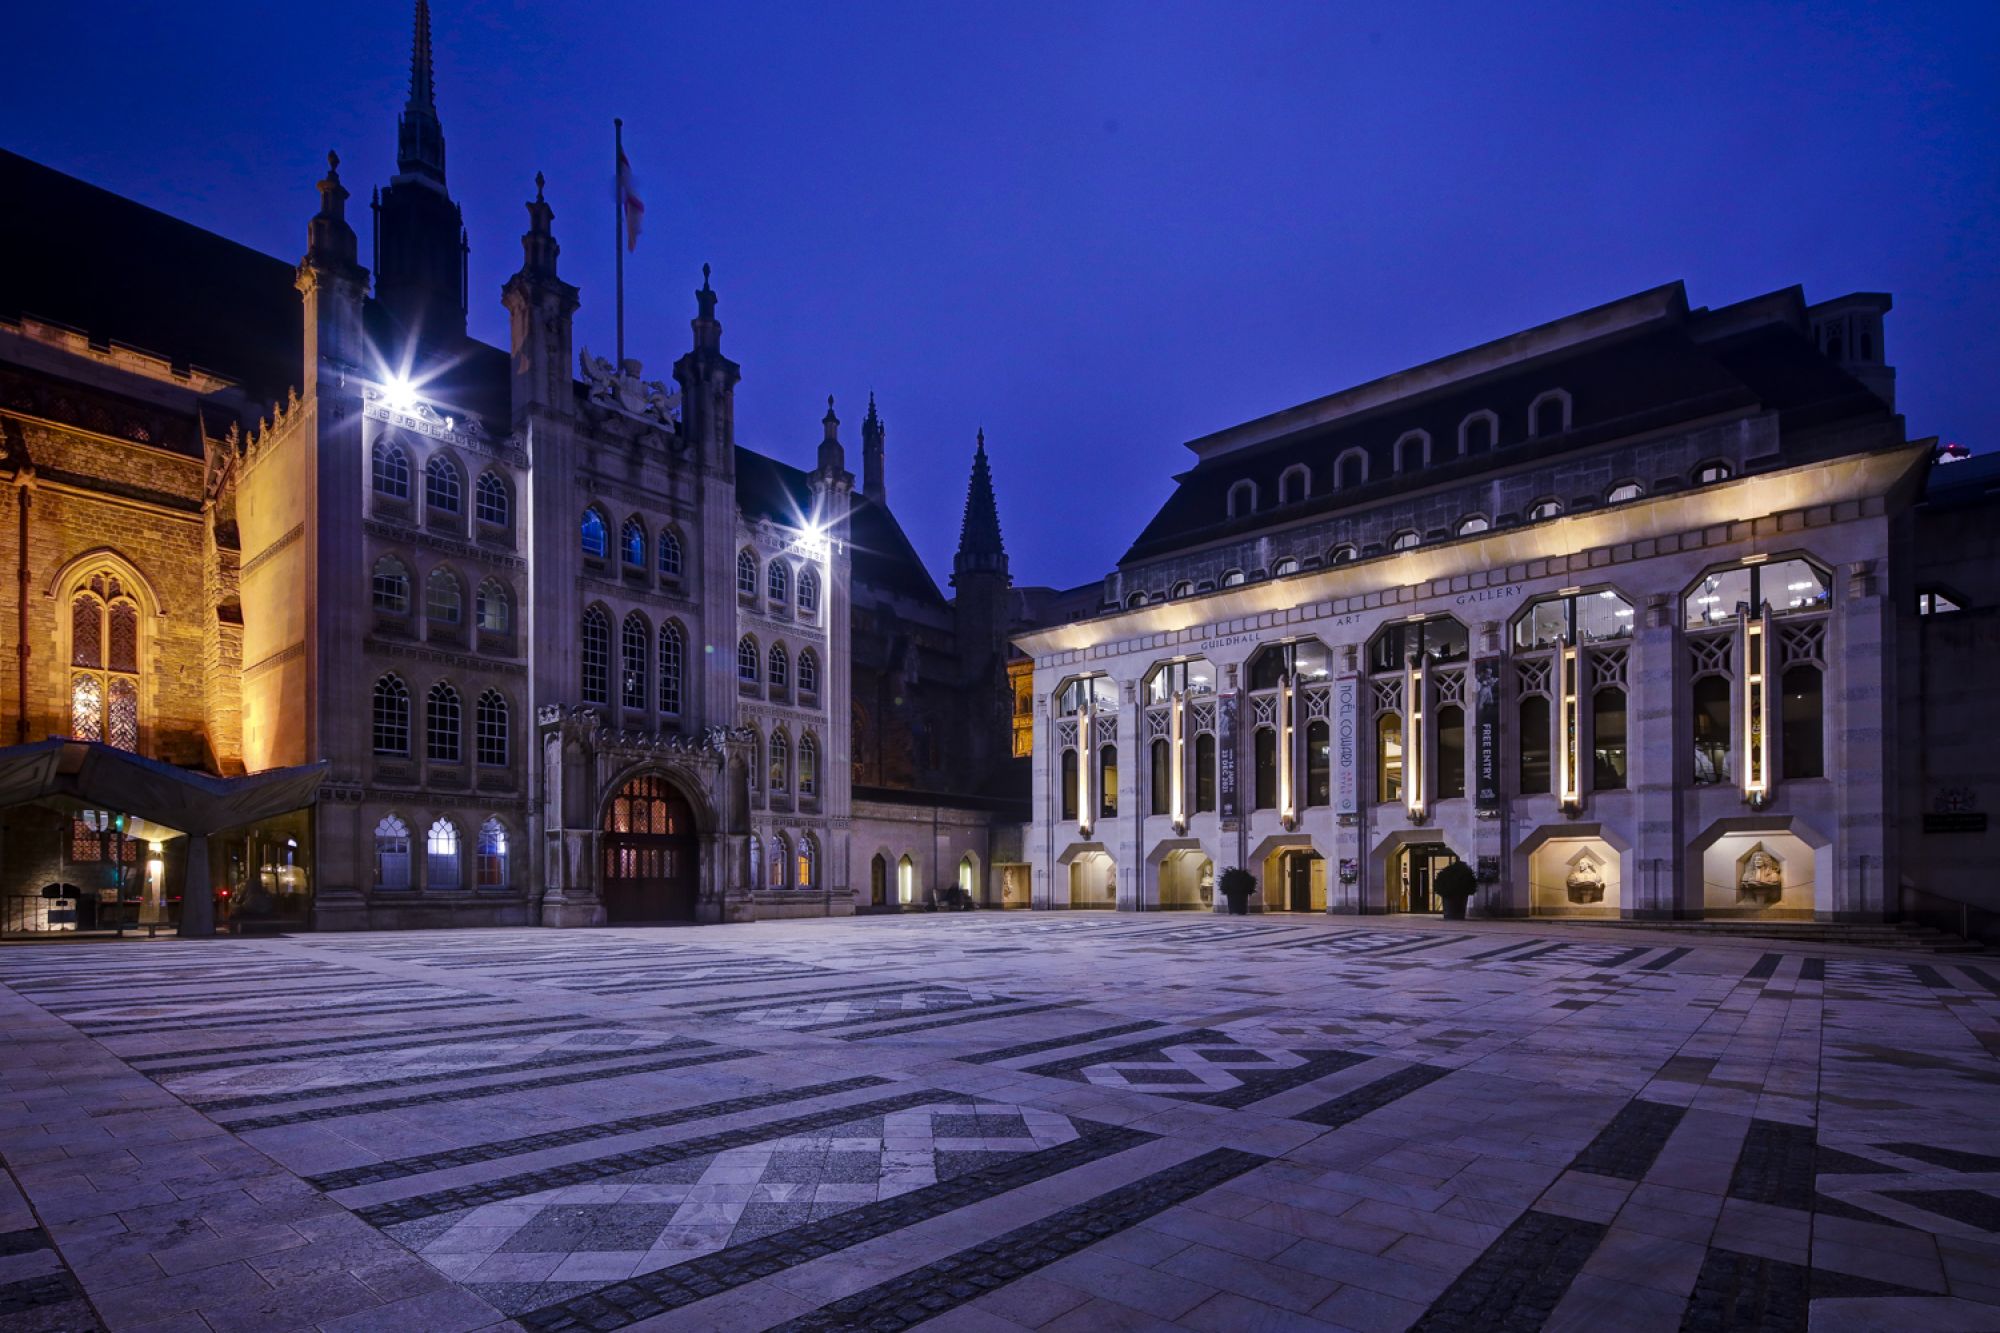 The Guildhall and Art Gallery at dusk